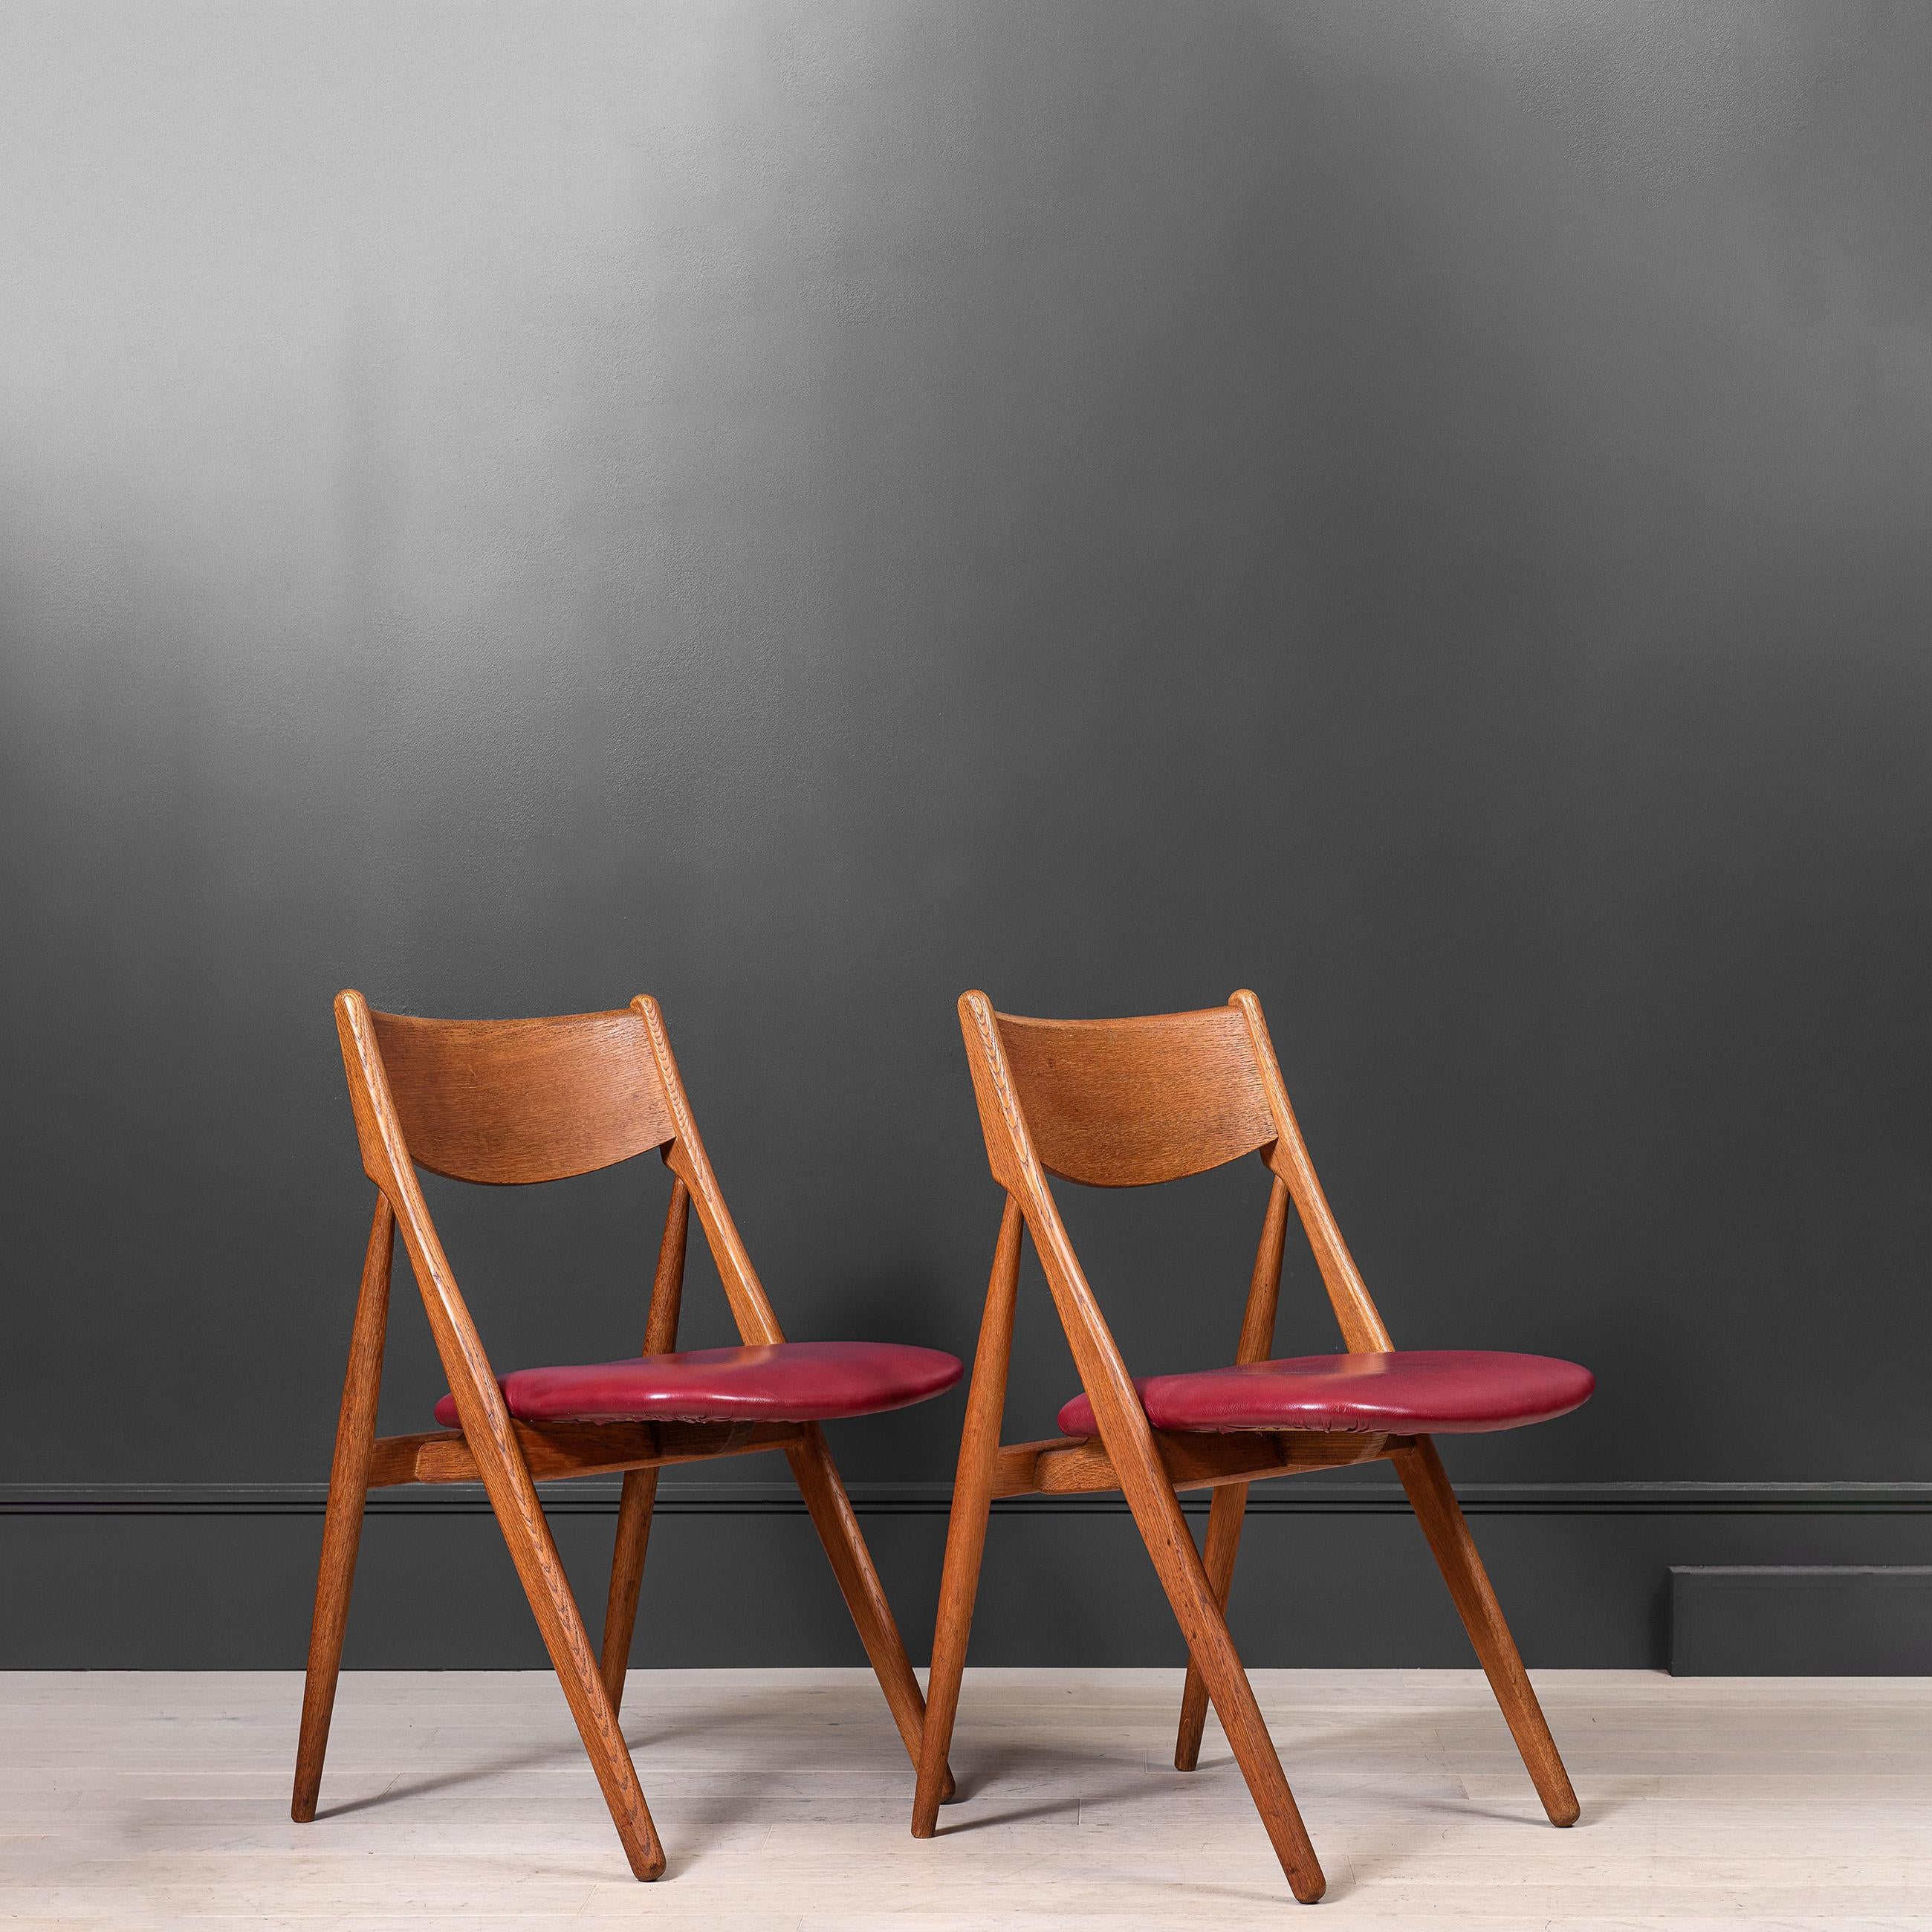 A matching pair of Danish midcentury chairs. Constructed from Oak with leather seat upholstery. Nice Minimal Modernist Scandinavian design. Reupholstery available upon request